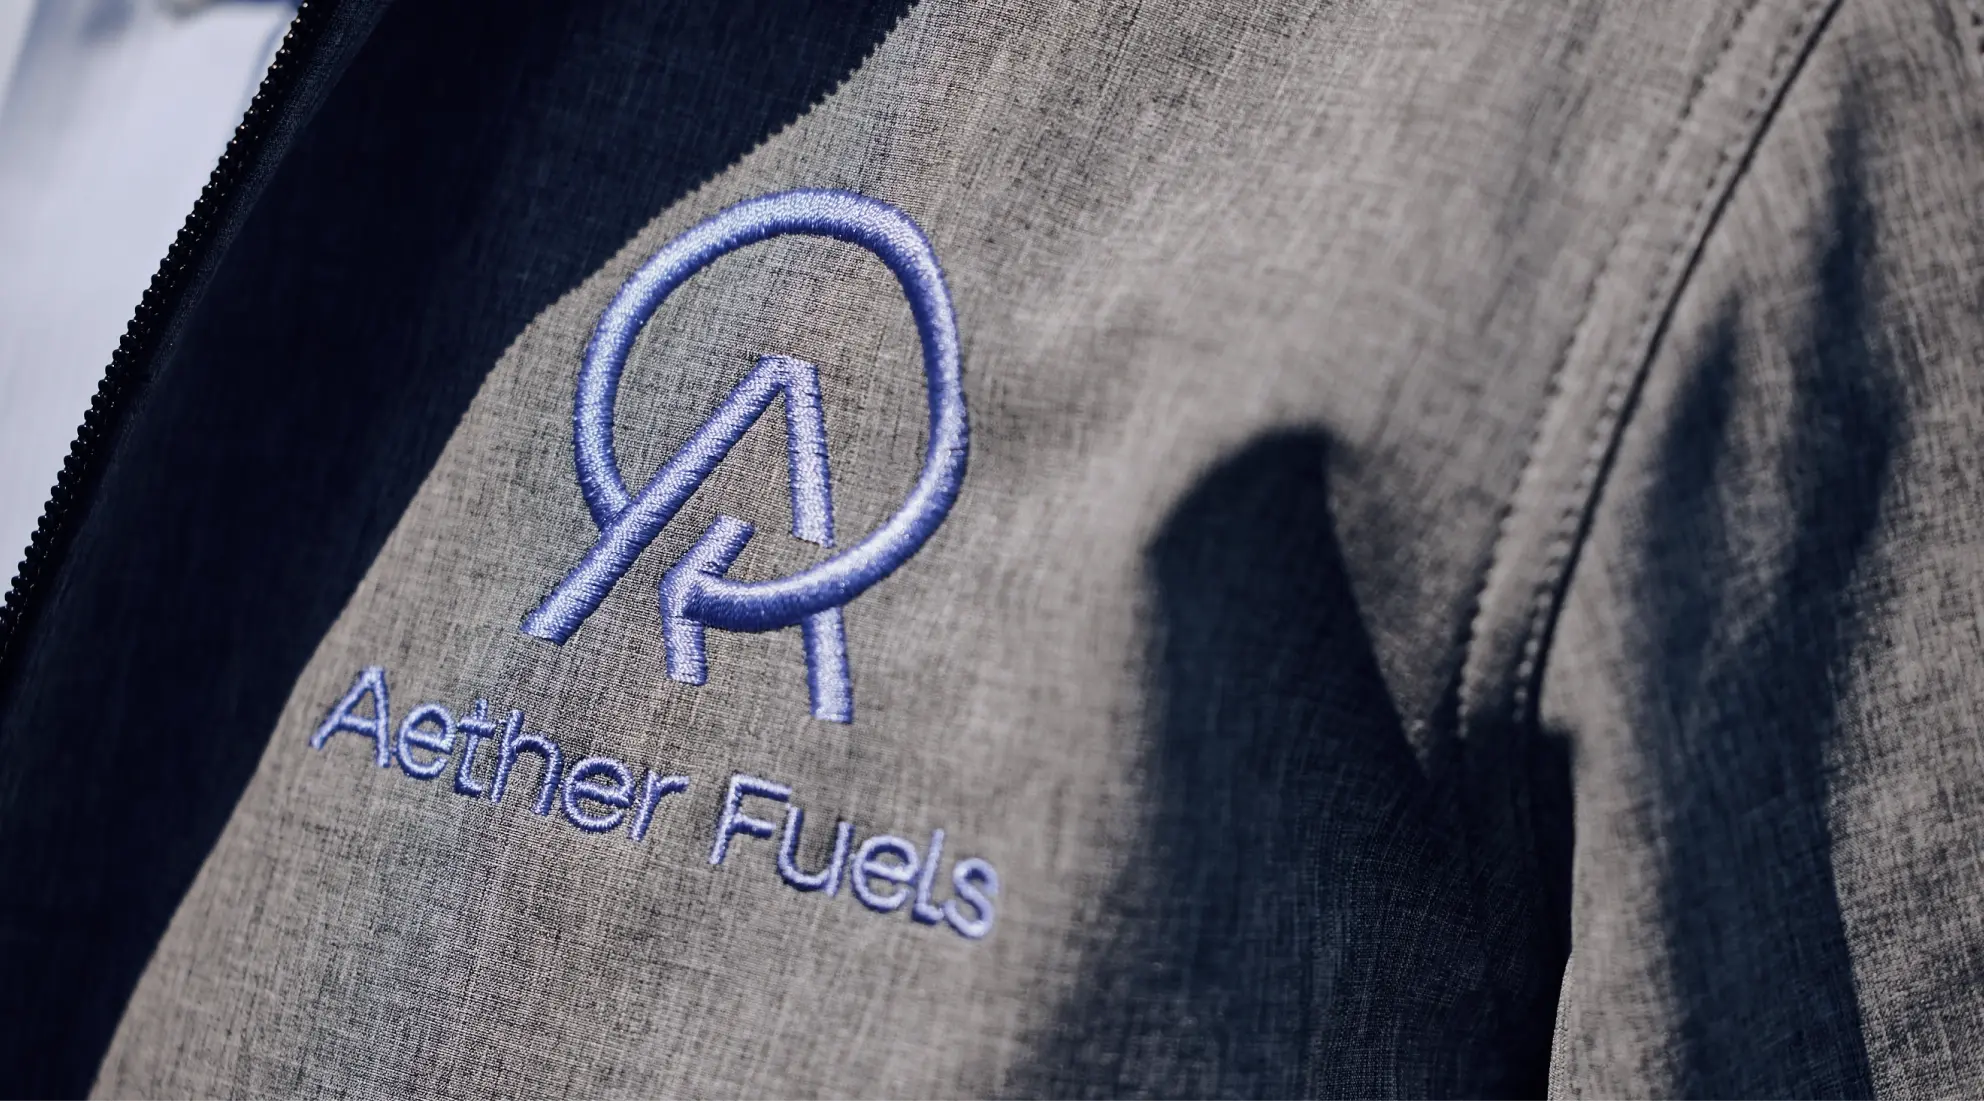 The Aether Fuels logo embroidered onto the breast of a suit coat